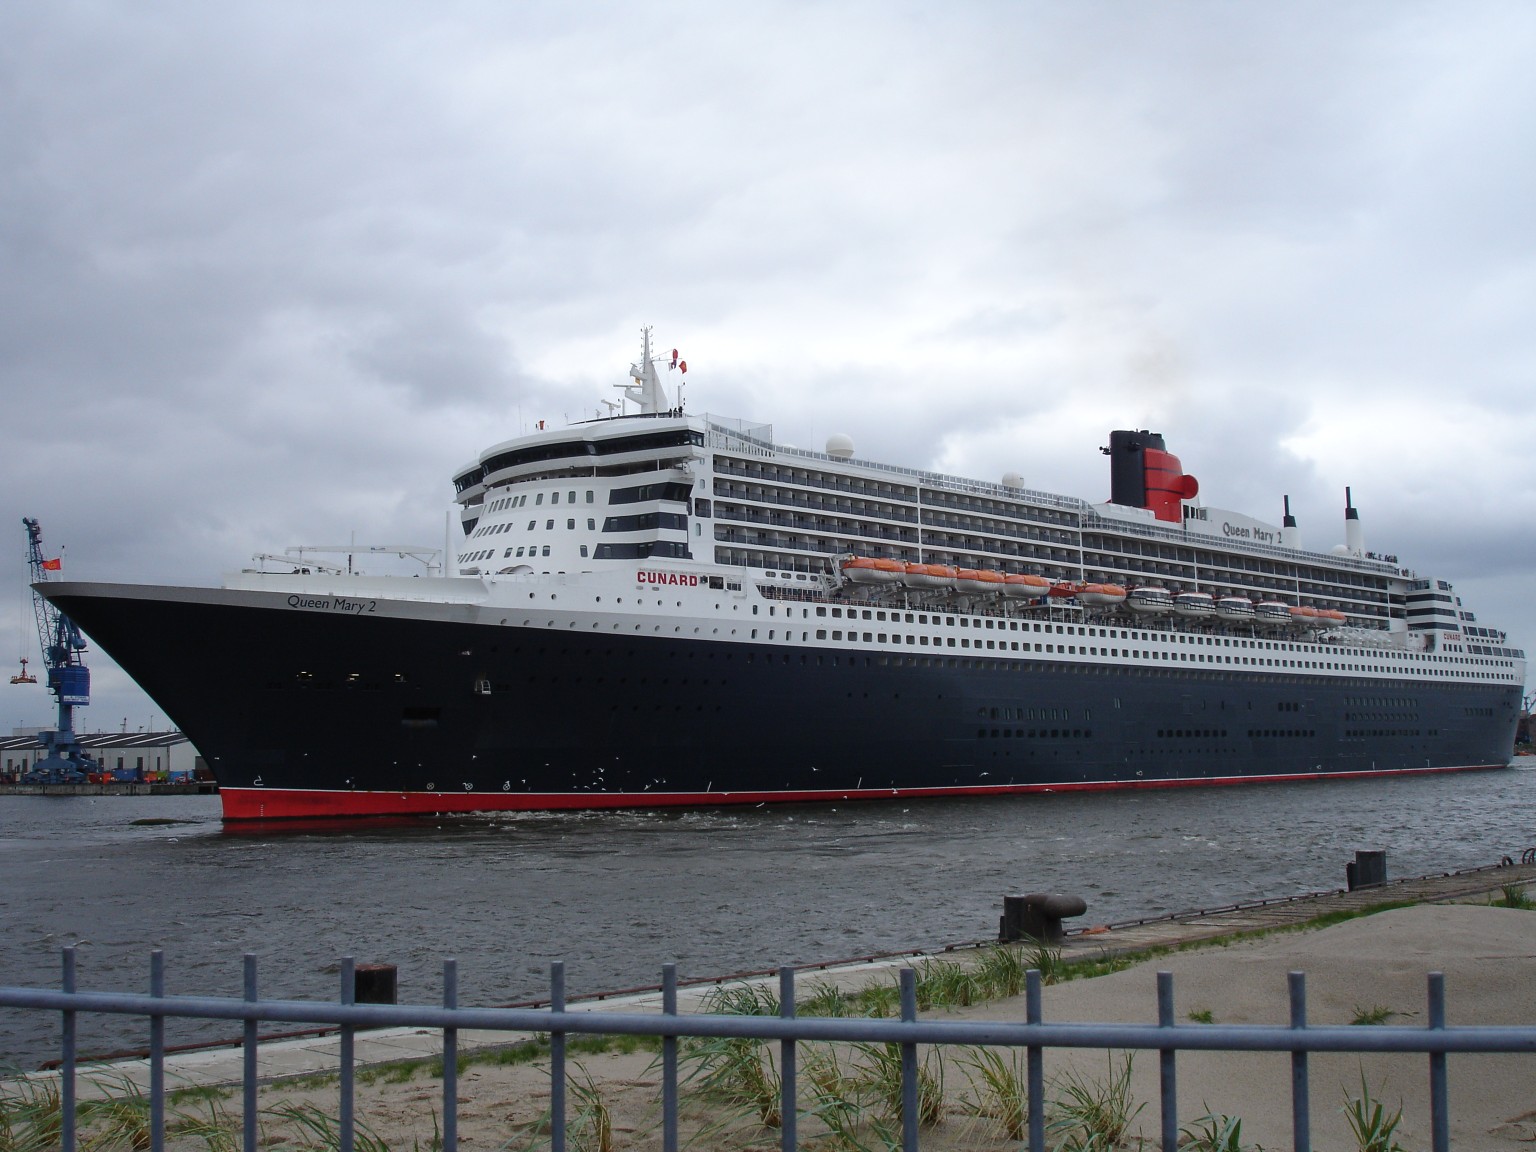 white queen mary 2 cruise ship free image | Peakpx